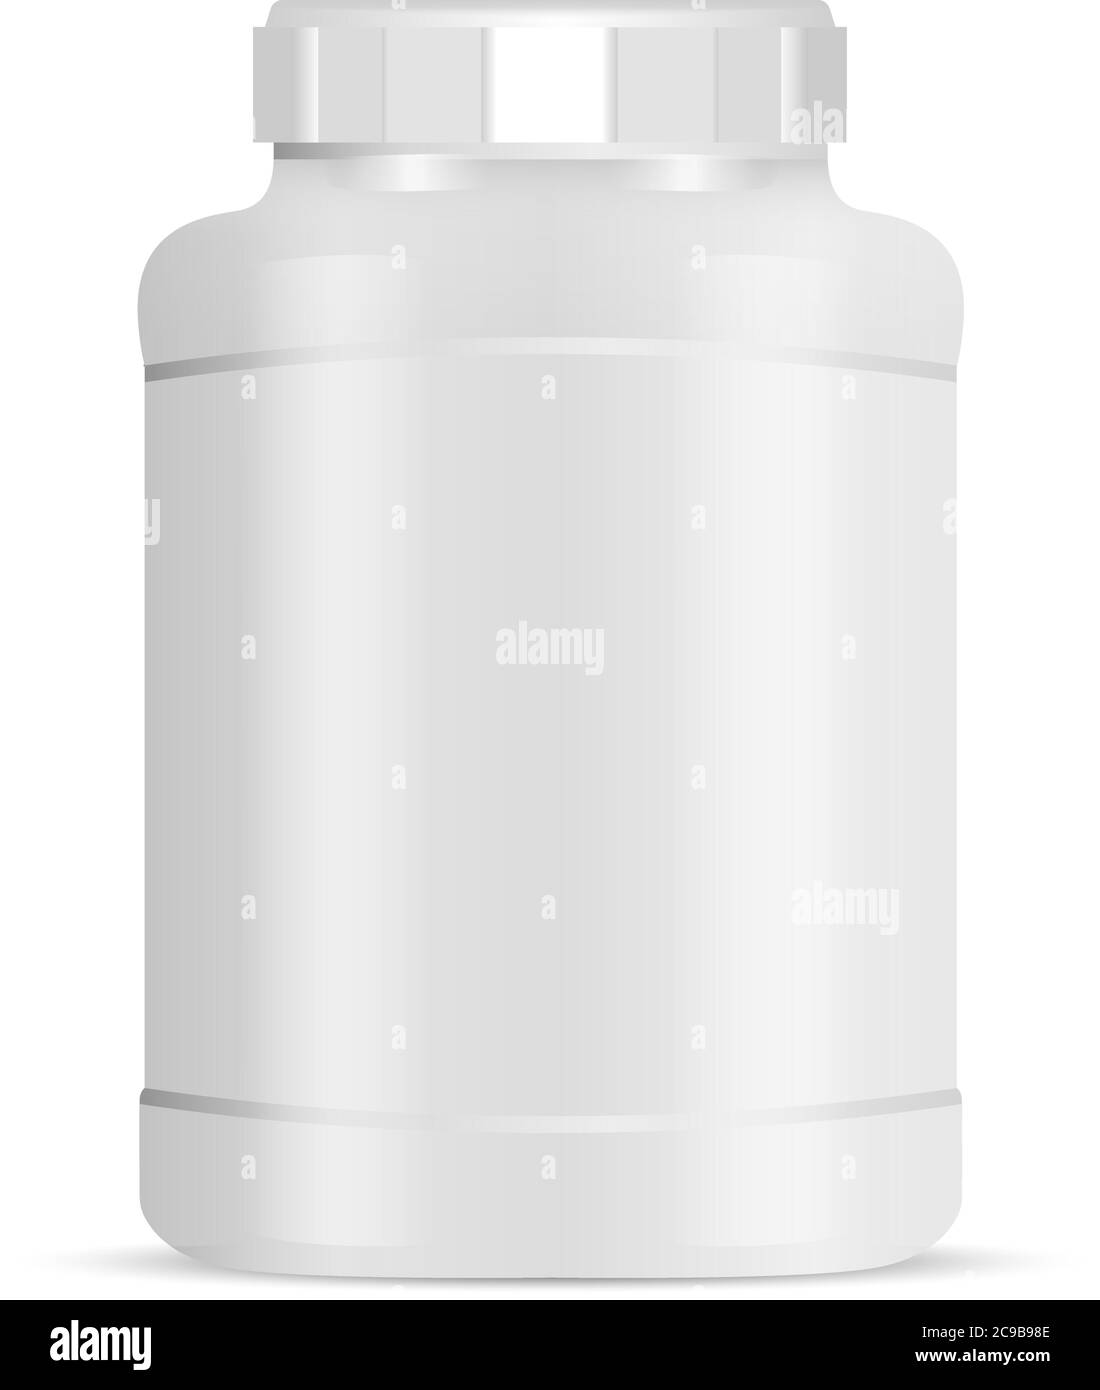 Big sports nutrition can vector illustration. Protein bottle with white lid. White jar isolated on background. Athletic Gym Food Powder Canister for M Stock Vector